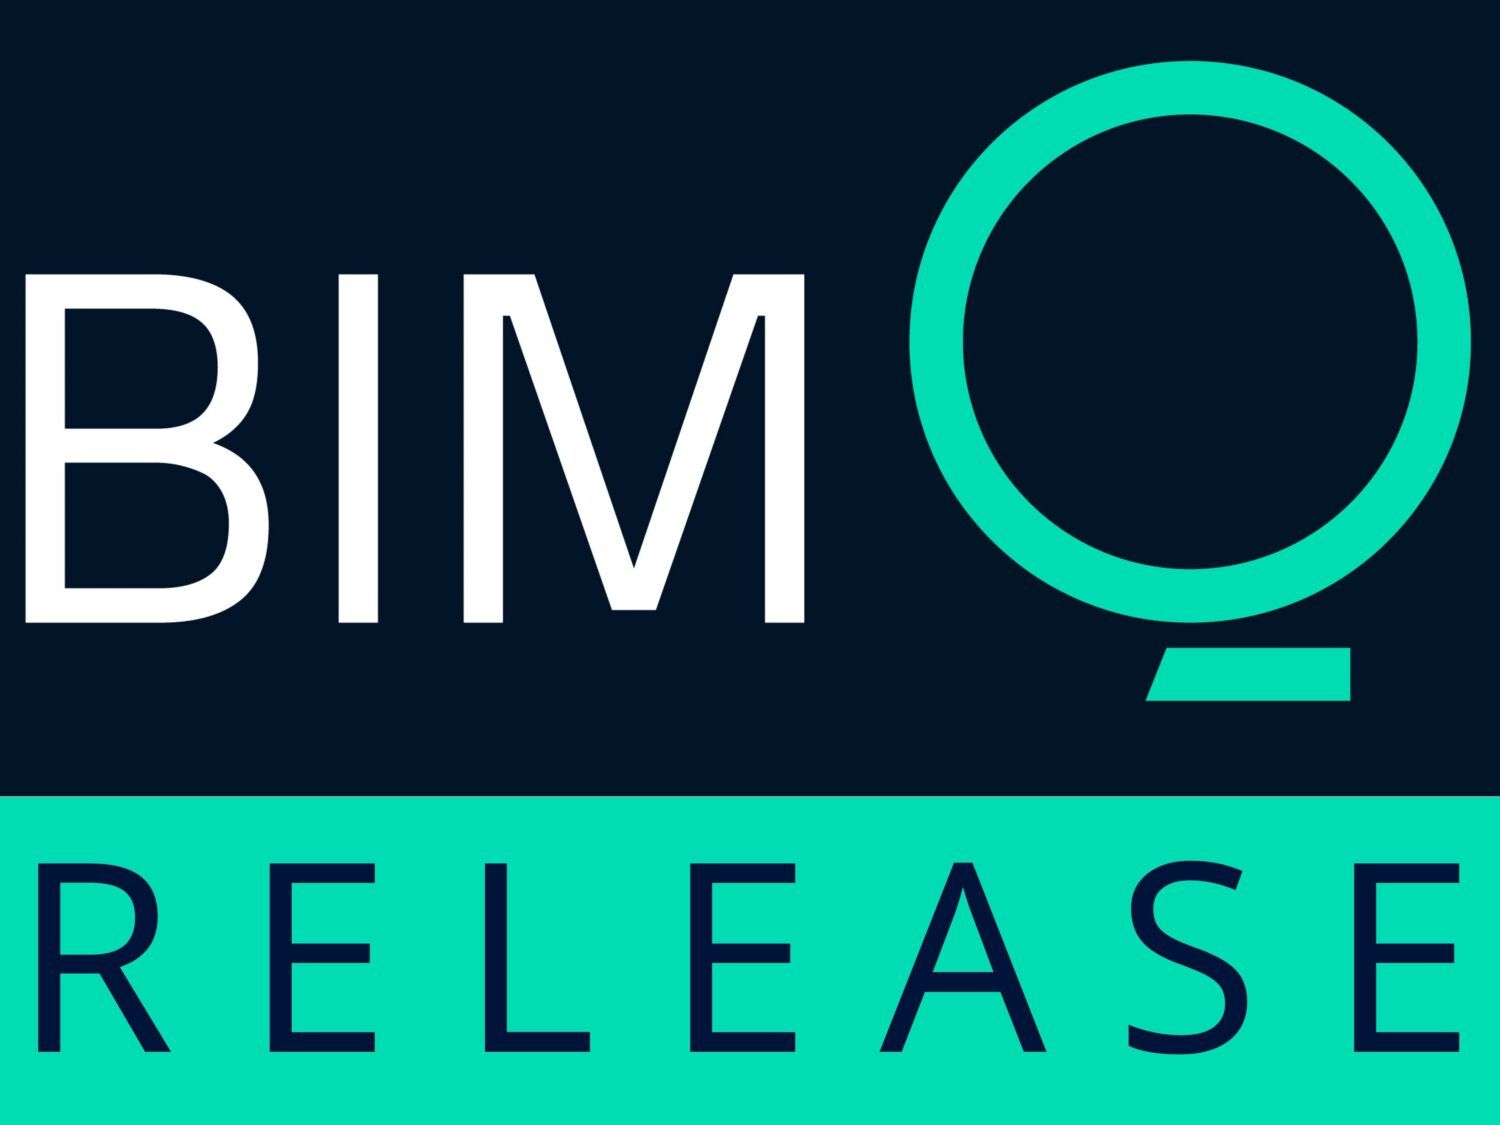 The BIMQ version 2.8. is now available!